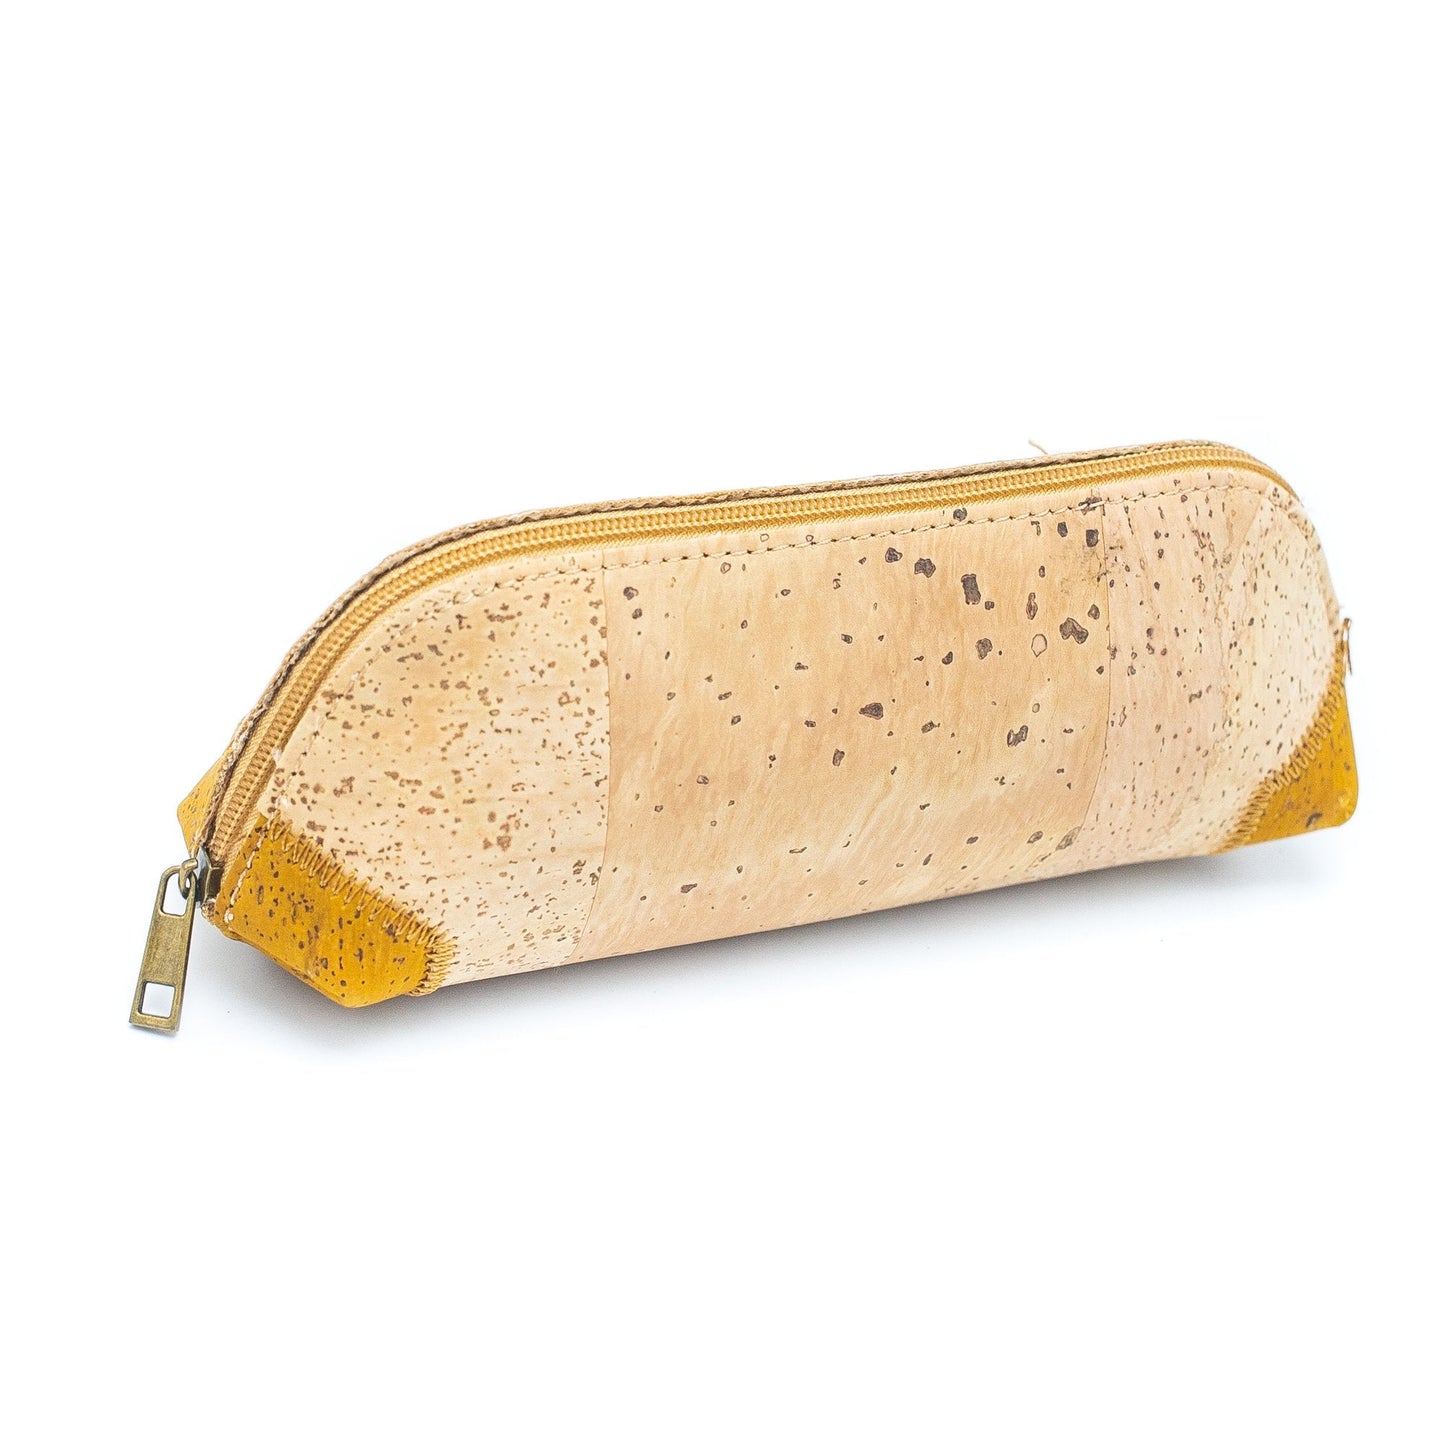 Natural Cork w/ Yellow Conners Curved Compact Vegan Pencil Case (5 units) | THE CORK COLLECTION